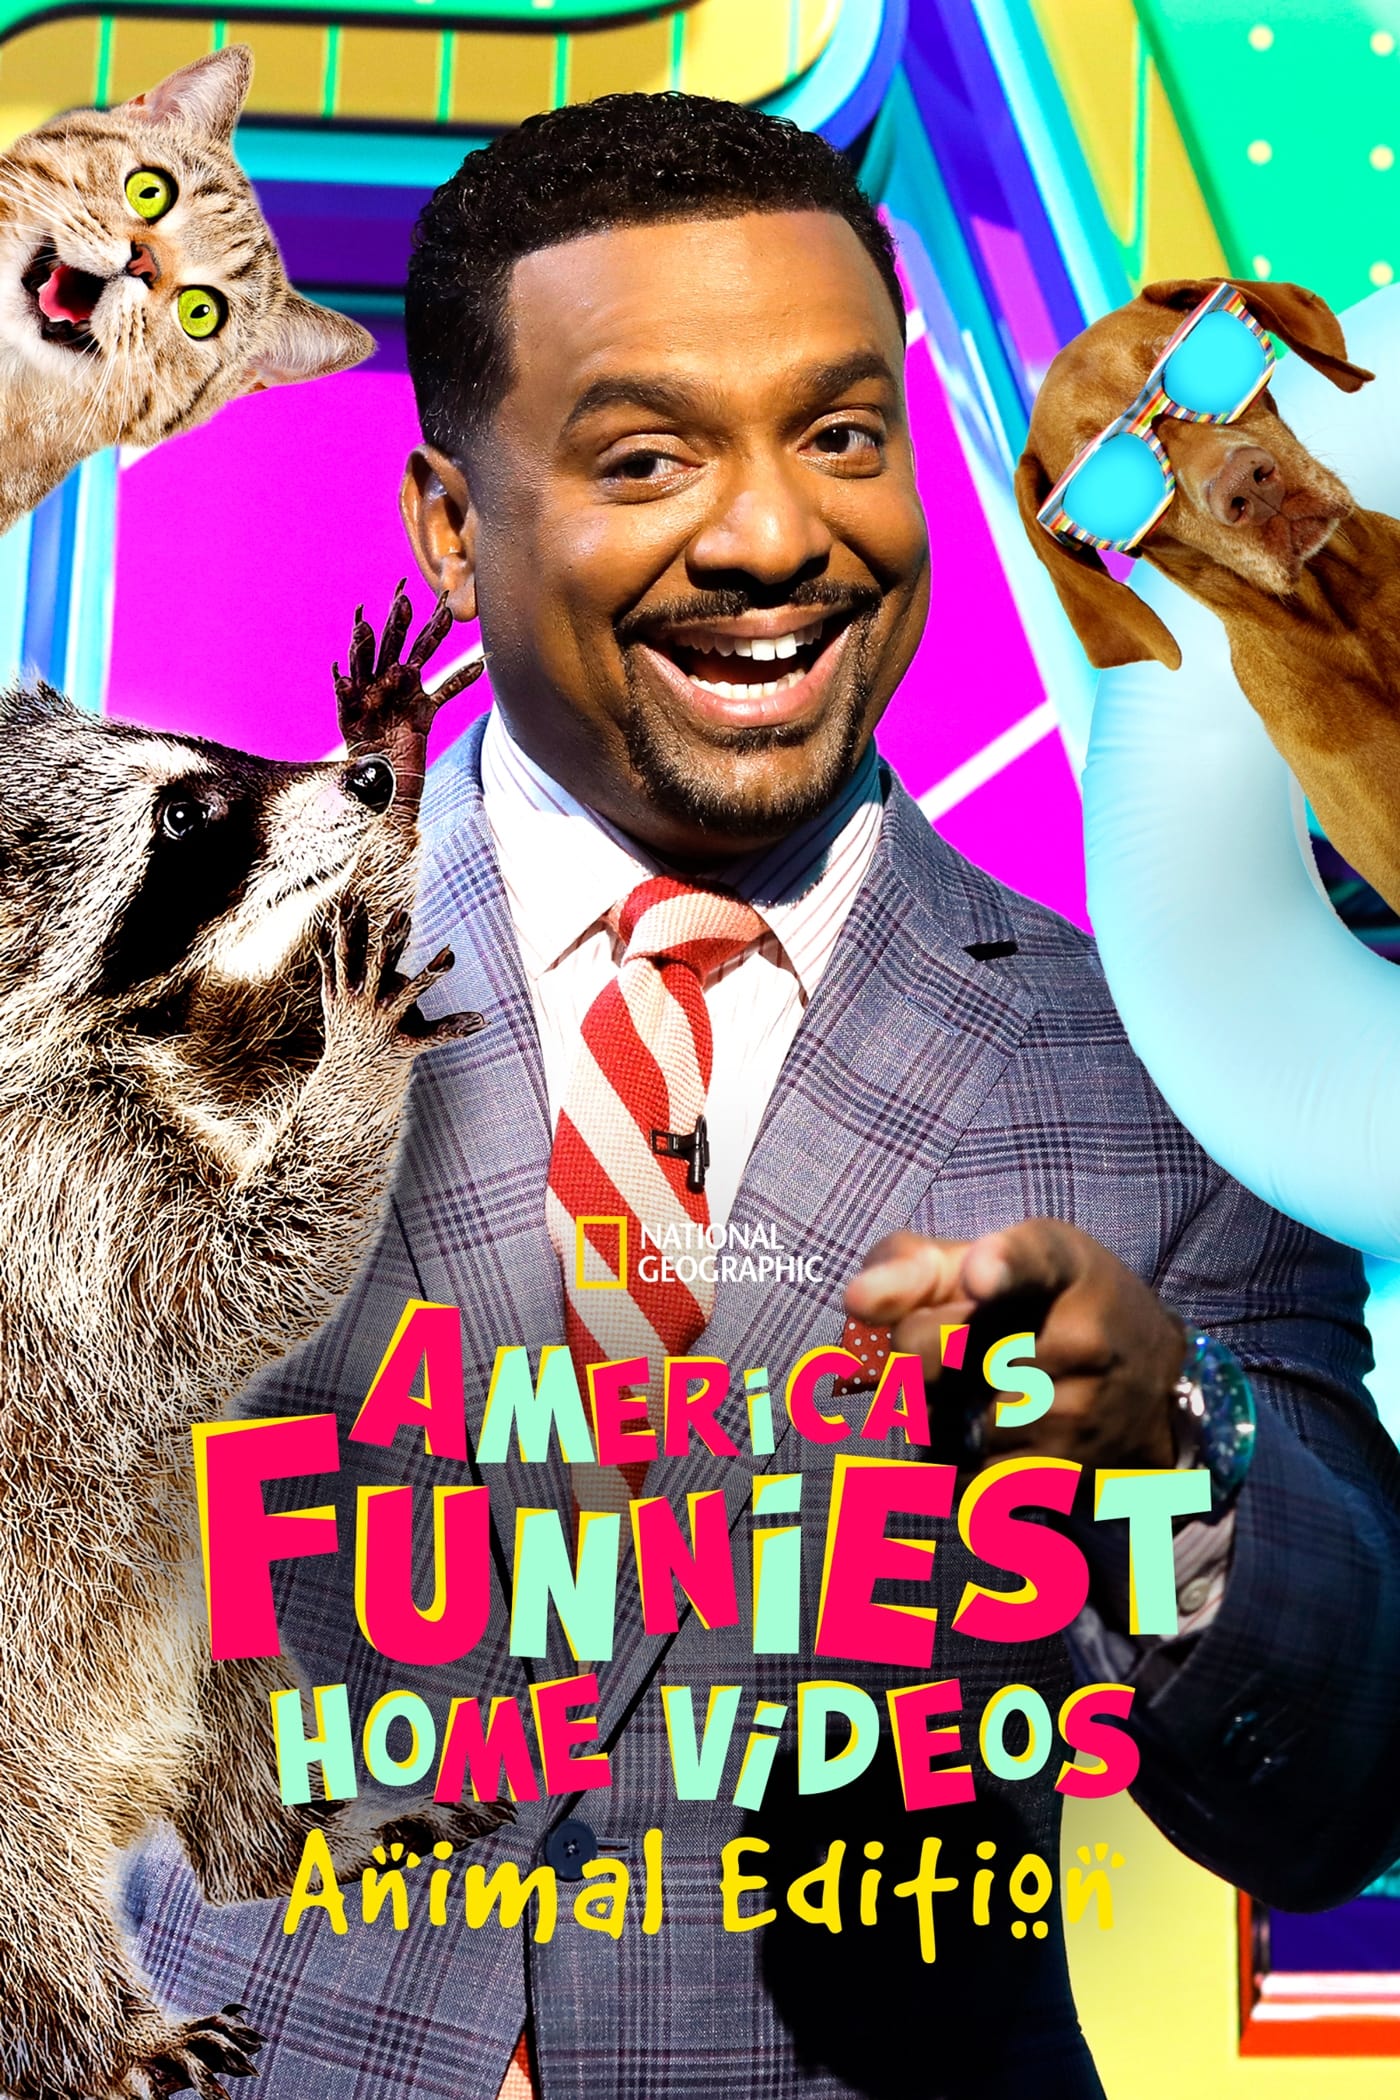 America's Funniest Home Videos Animal Edition Where to Watch and